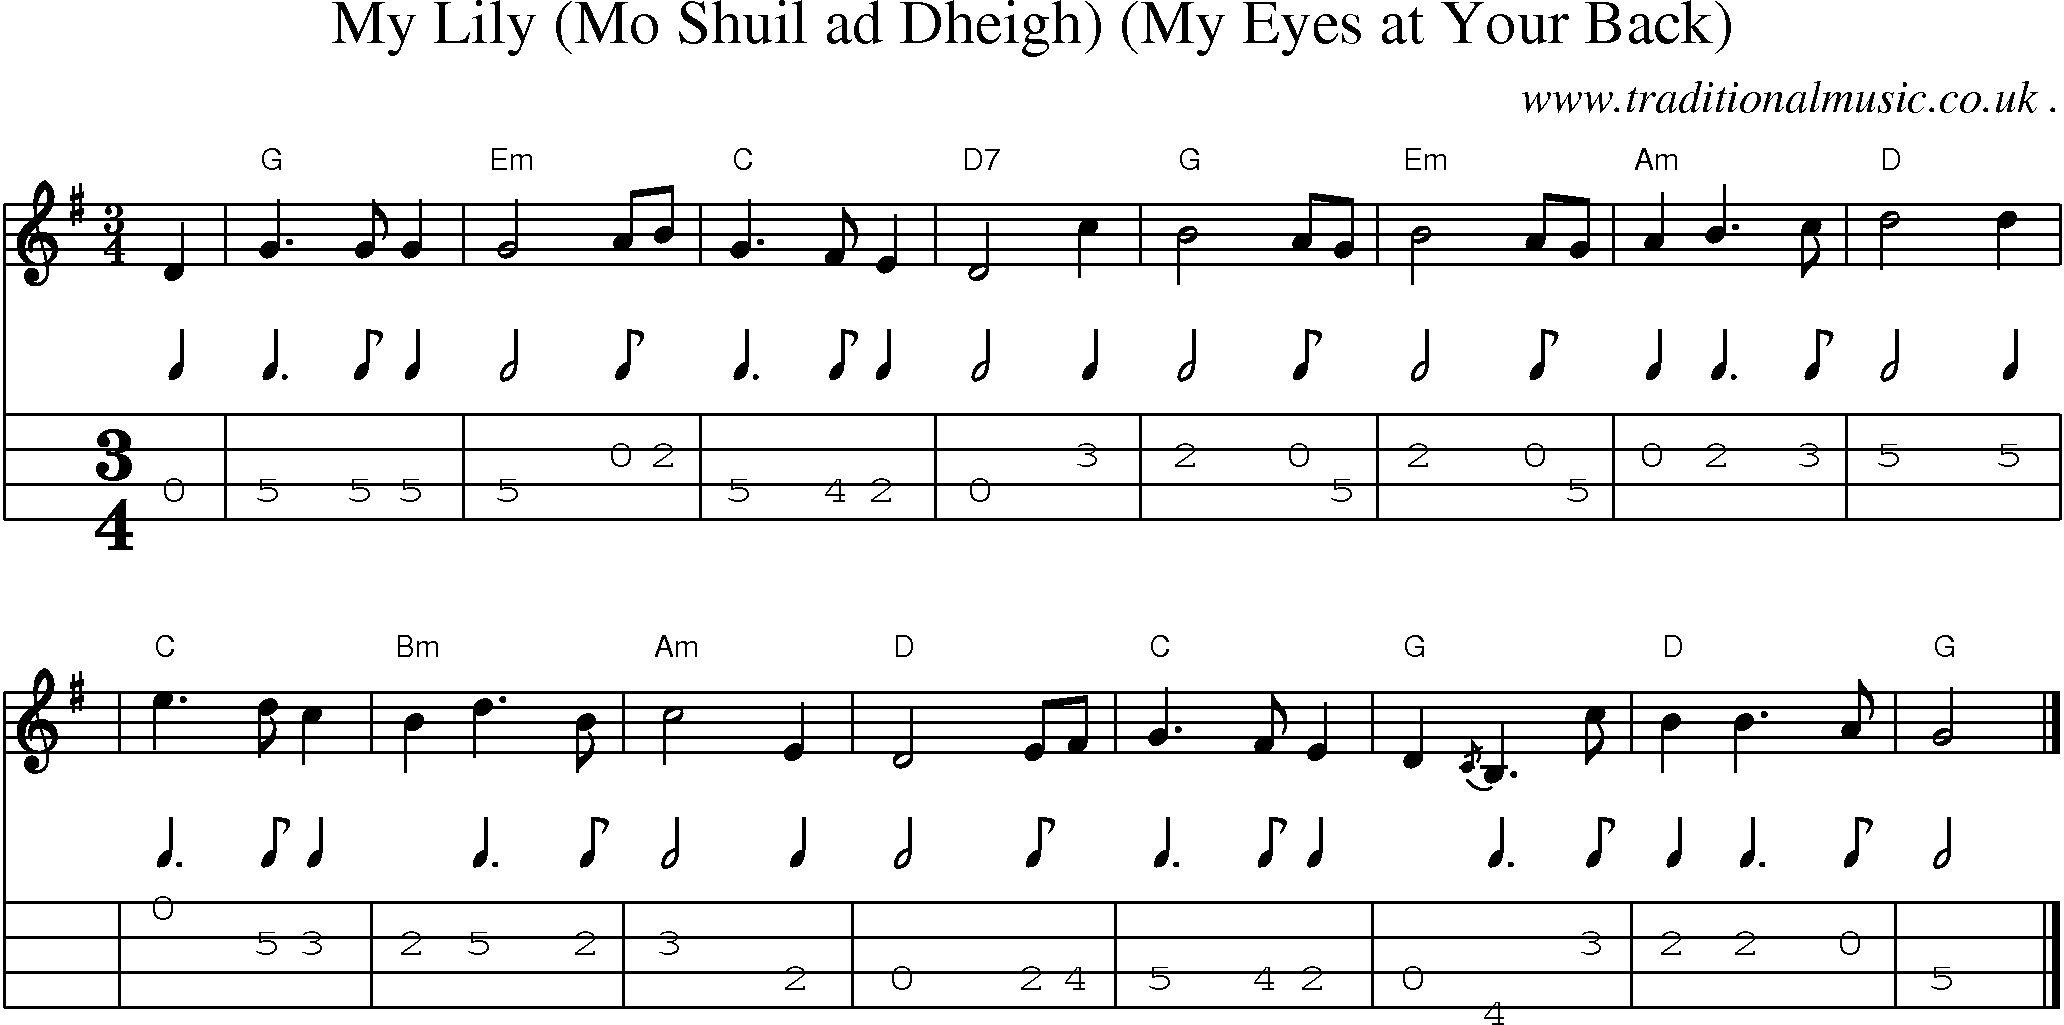 Sheet-music  score, Chords and Mandolin Tabs for My Lily Mo Shuil Ad Dheigh My Eyes At Your Back